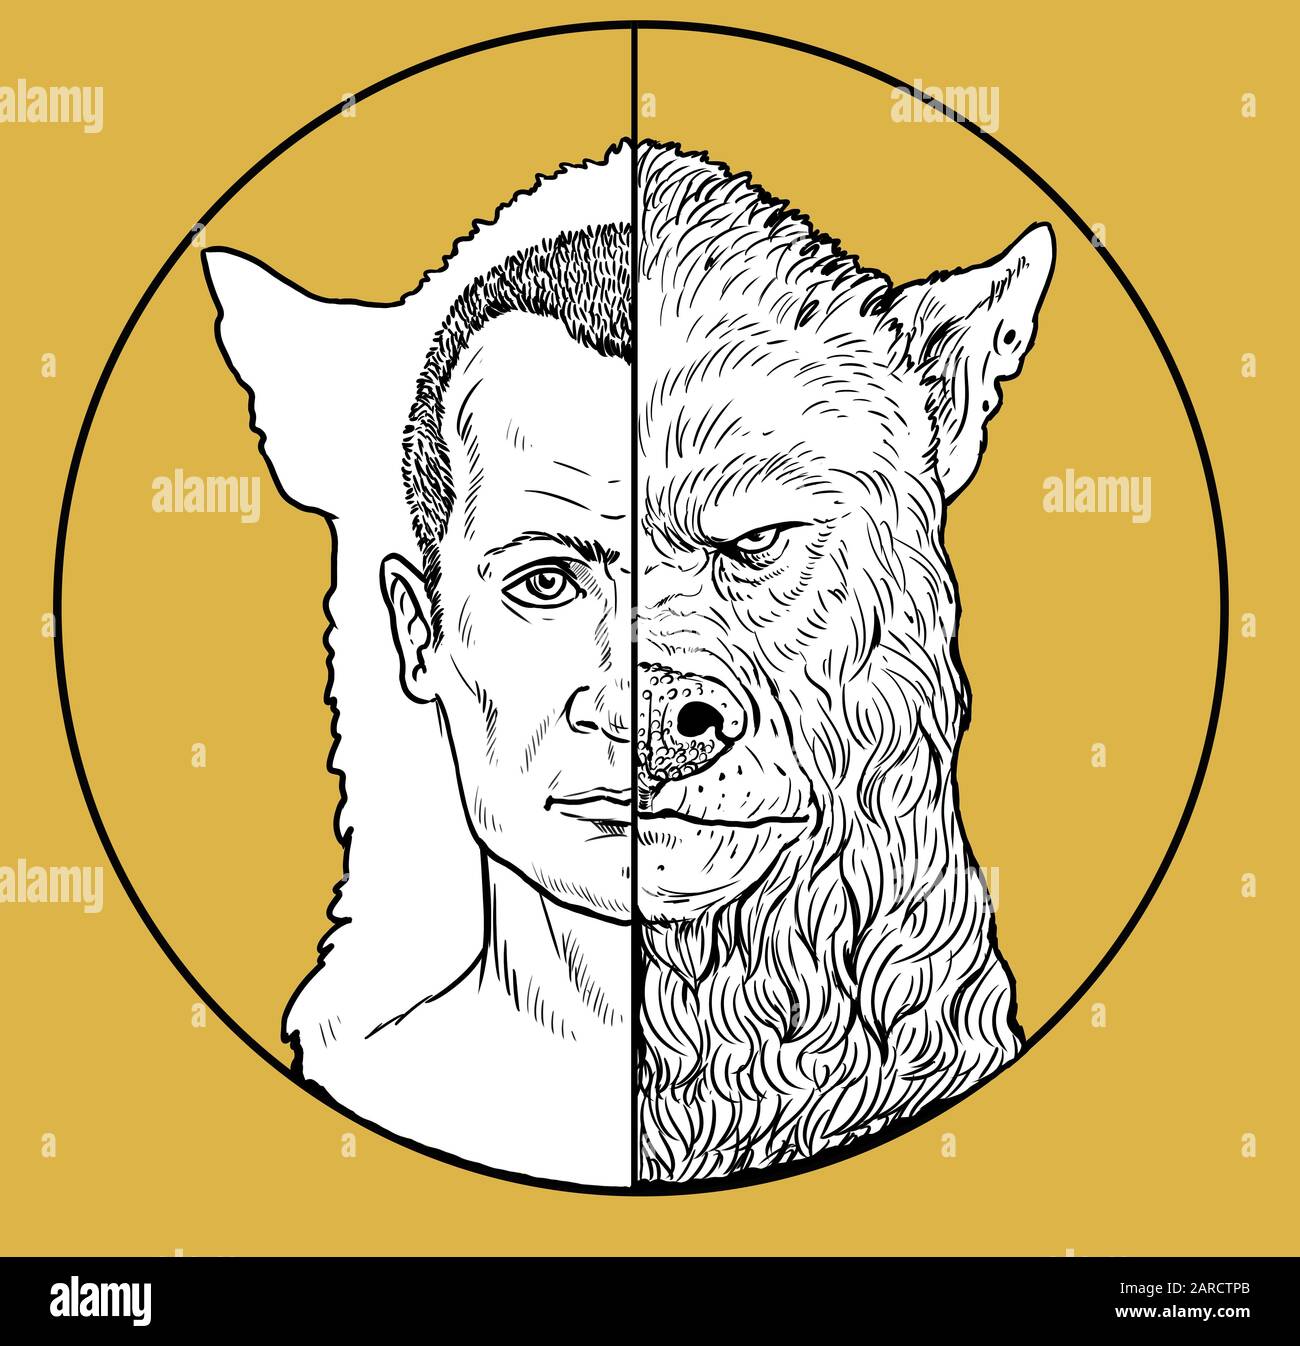 Man turns into a werewolf. Two sides of the soul. Monster silhouette illustration. Stock Photo